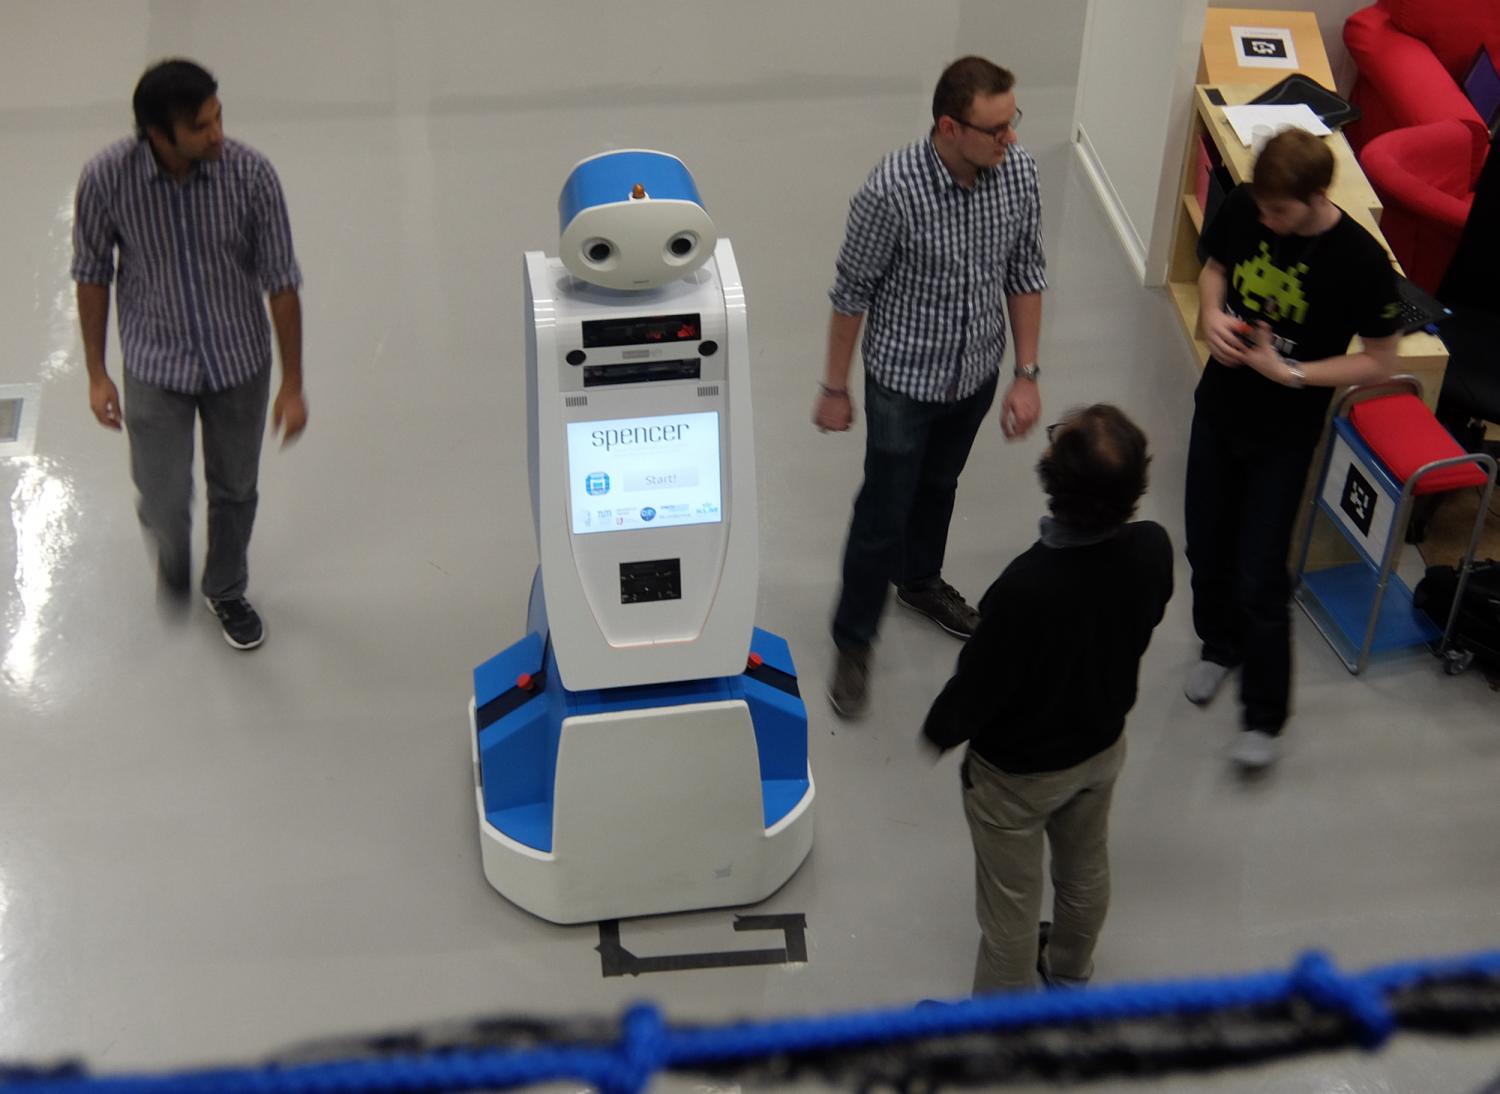 photo of 'Spencer' the robot is here to help guide lost airline passengers image